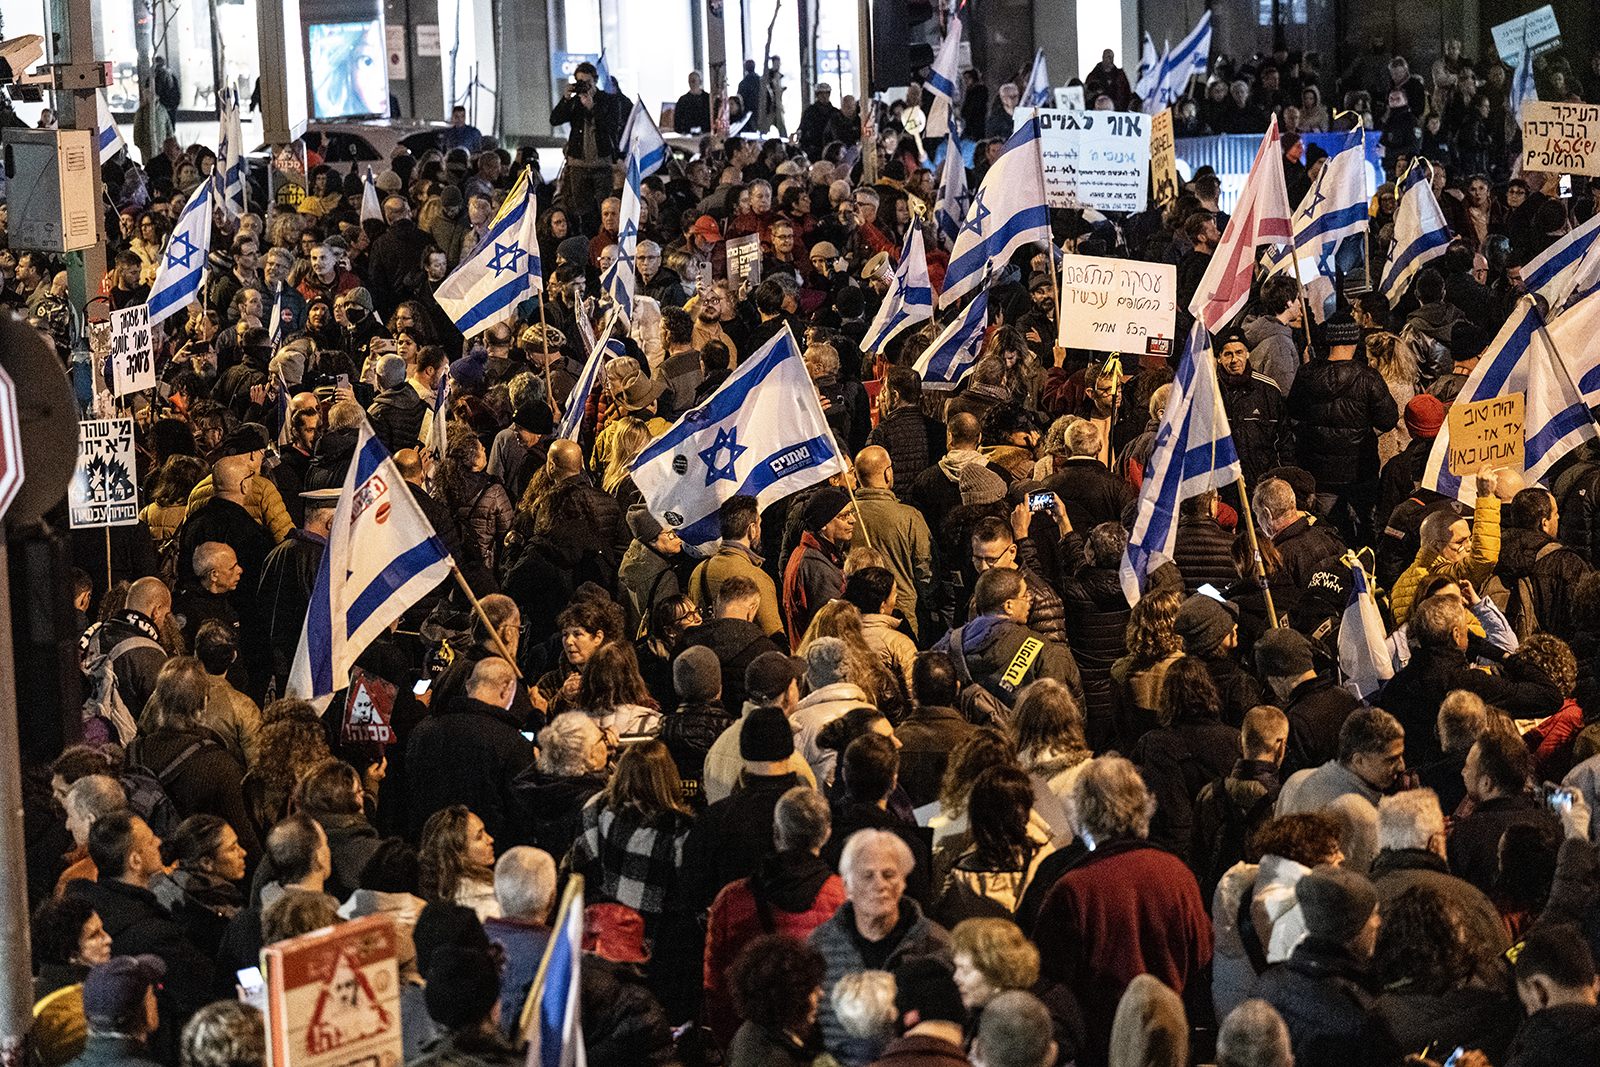 Protesters gather to stage a demonstration demanding the resignation of the government and the holding of early elections, in Tel Aviv, Israel on February 3.